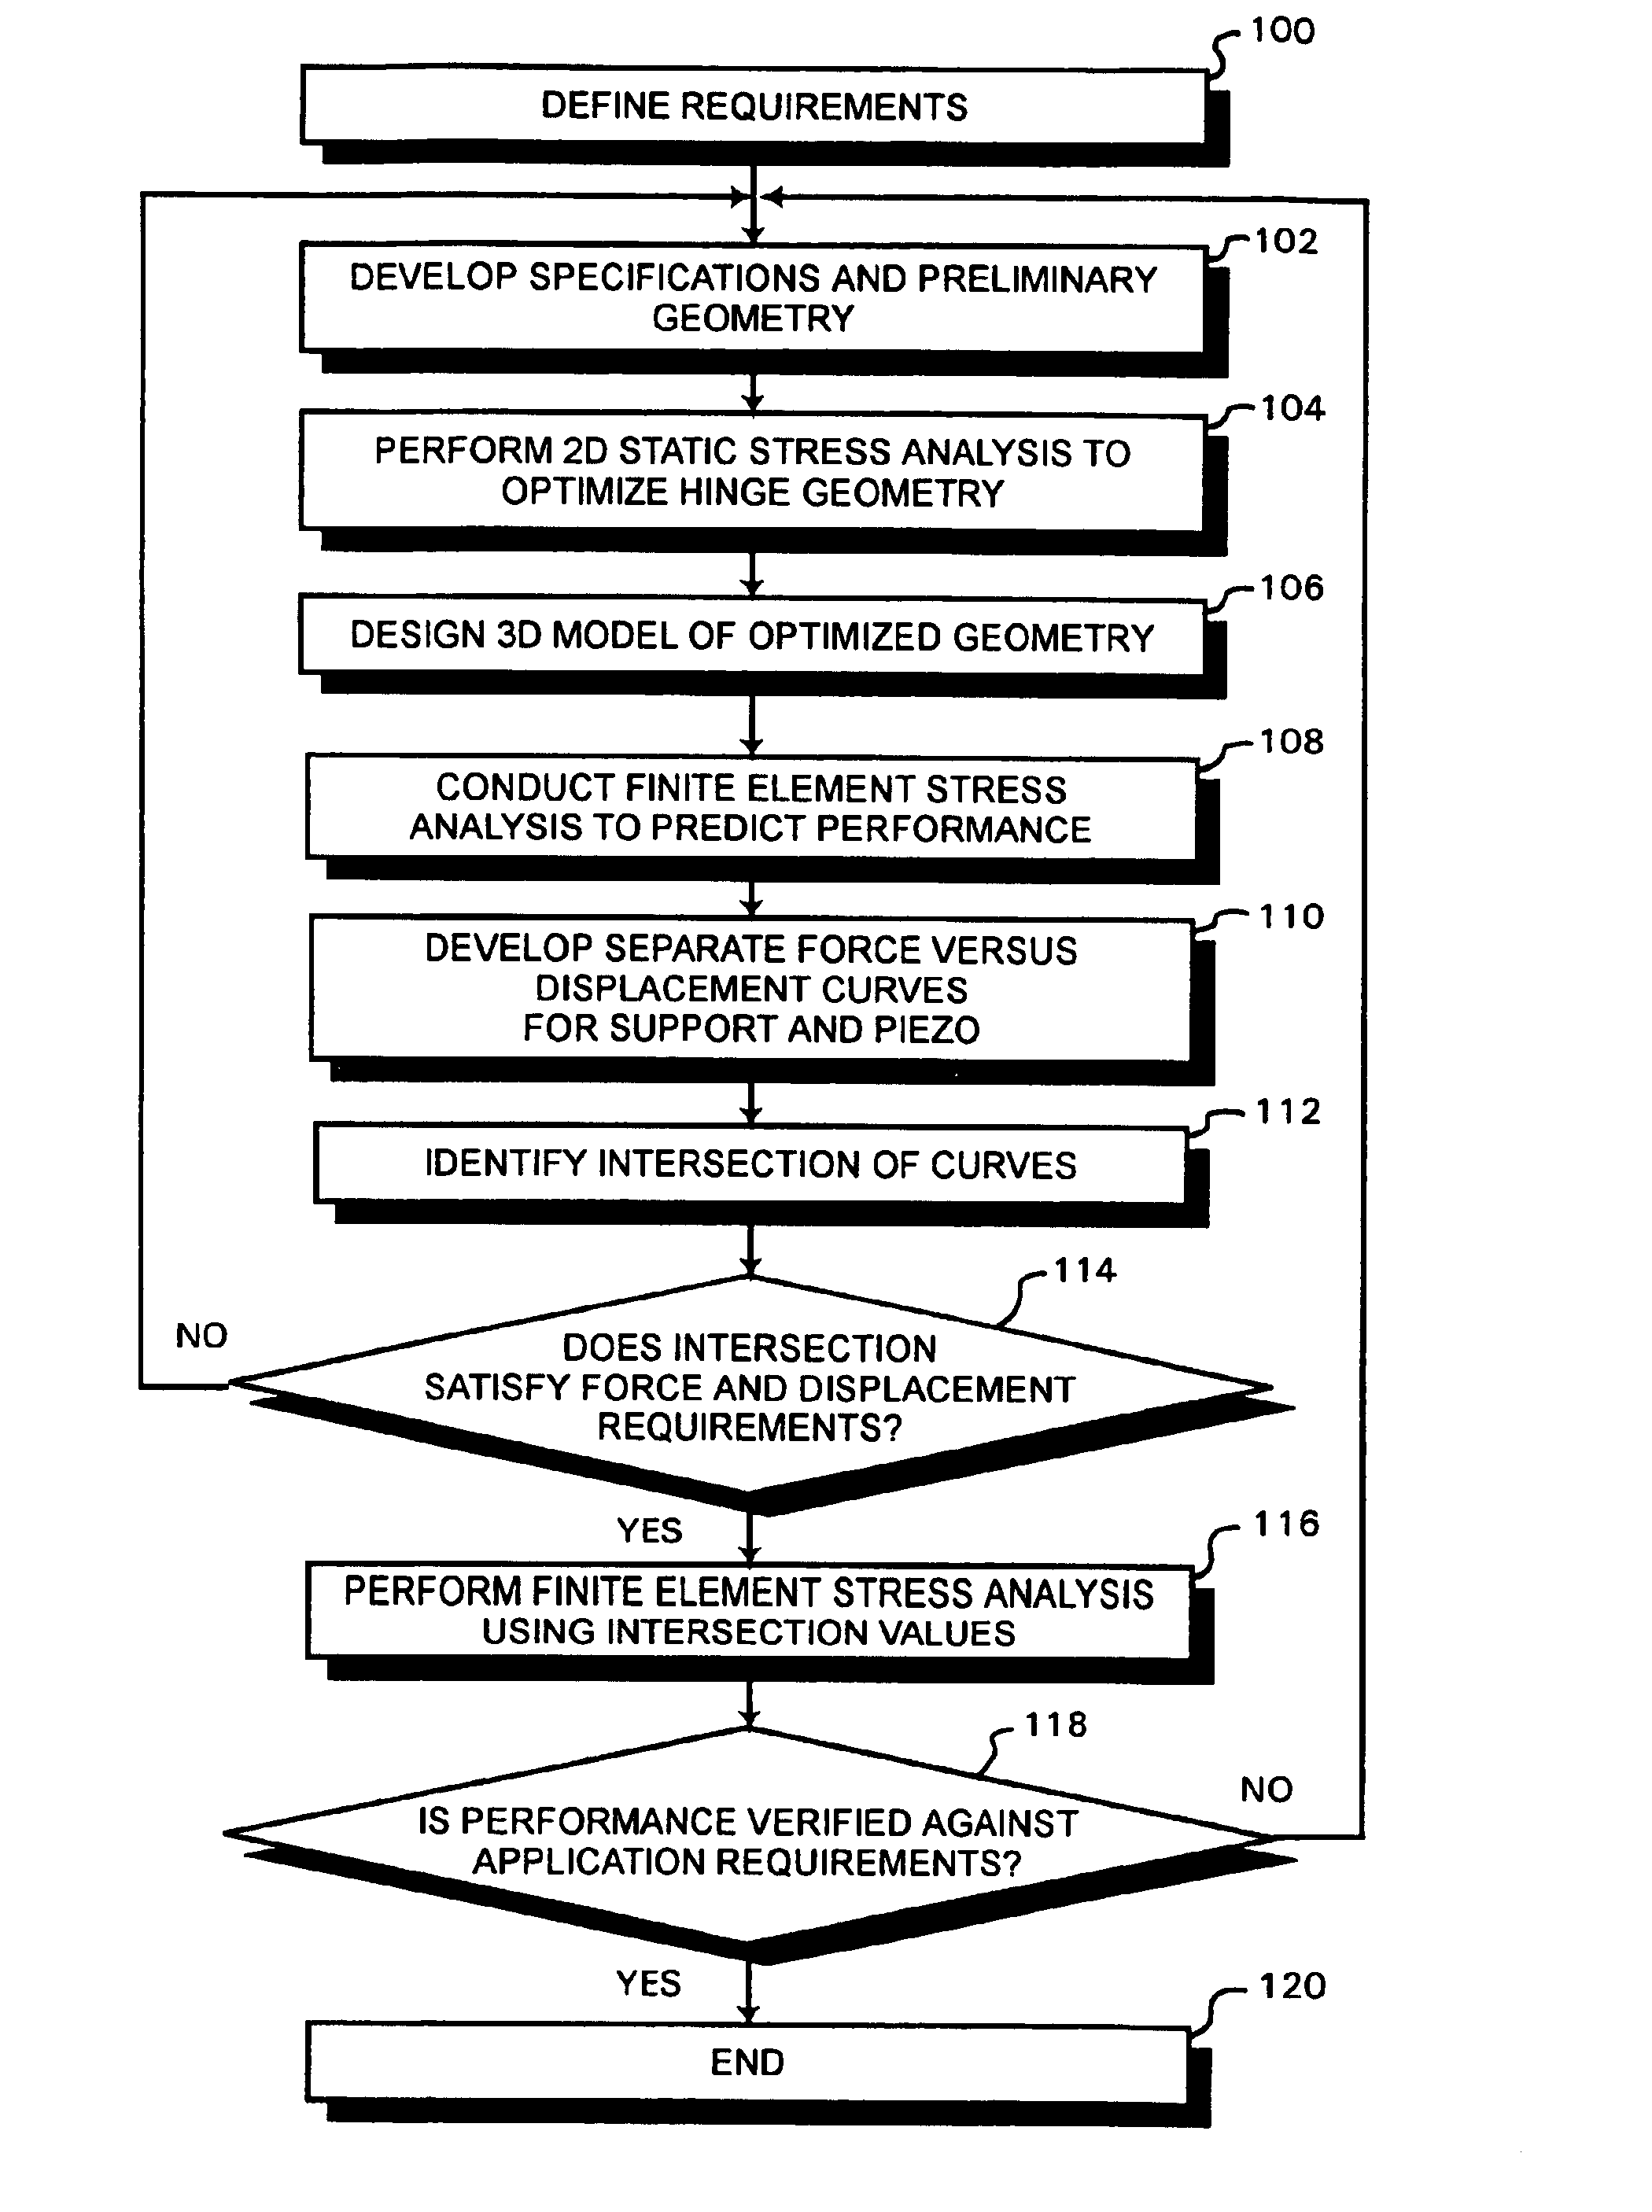 Apparatus for moving a pair of opposing surfaces in response to an electrical activation